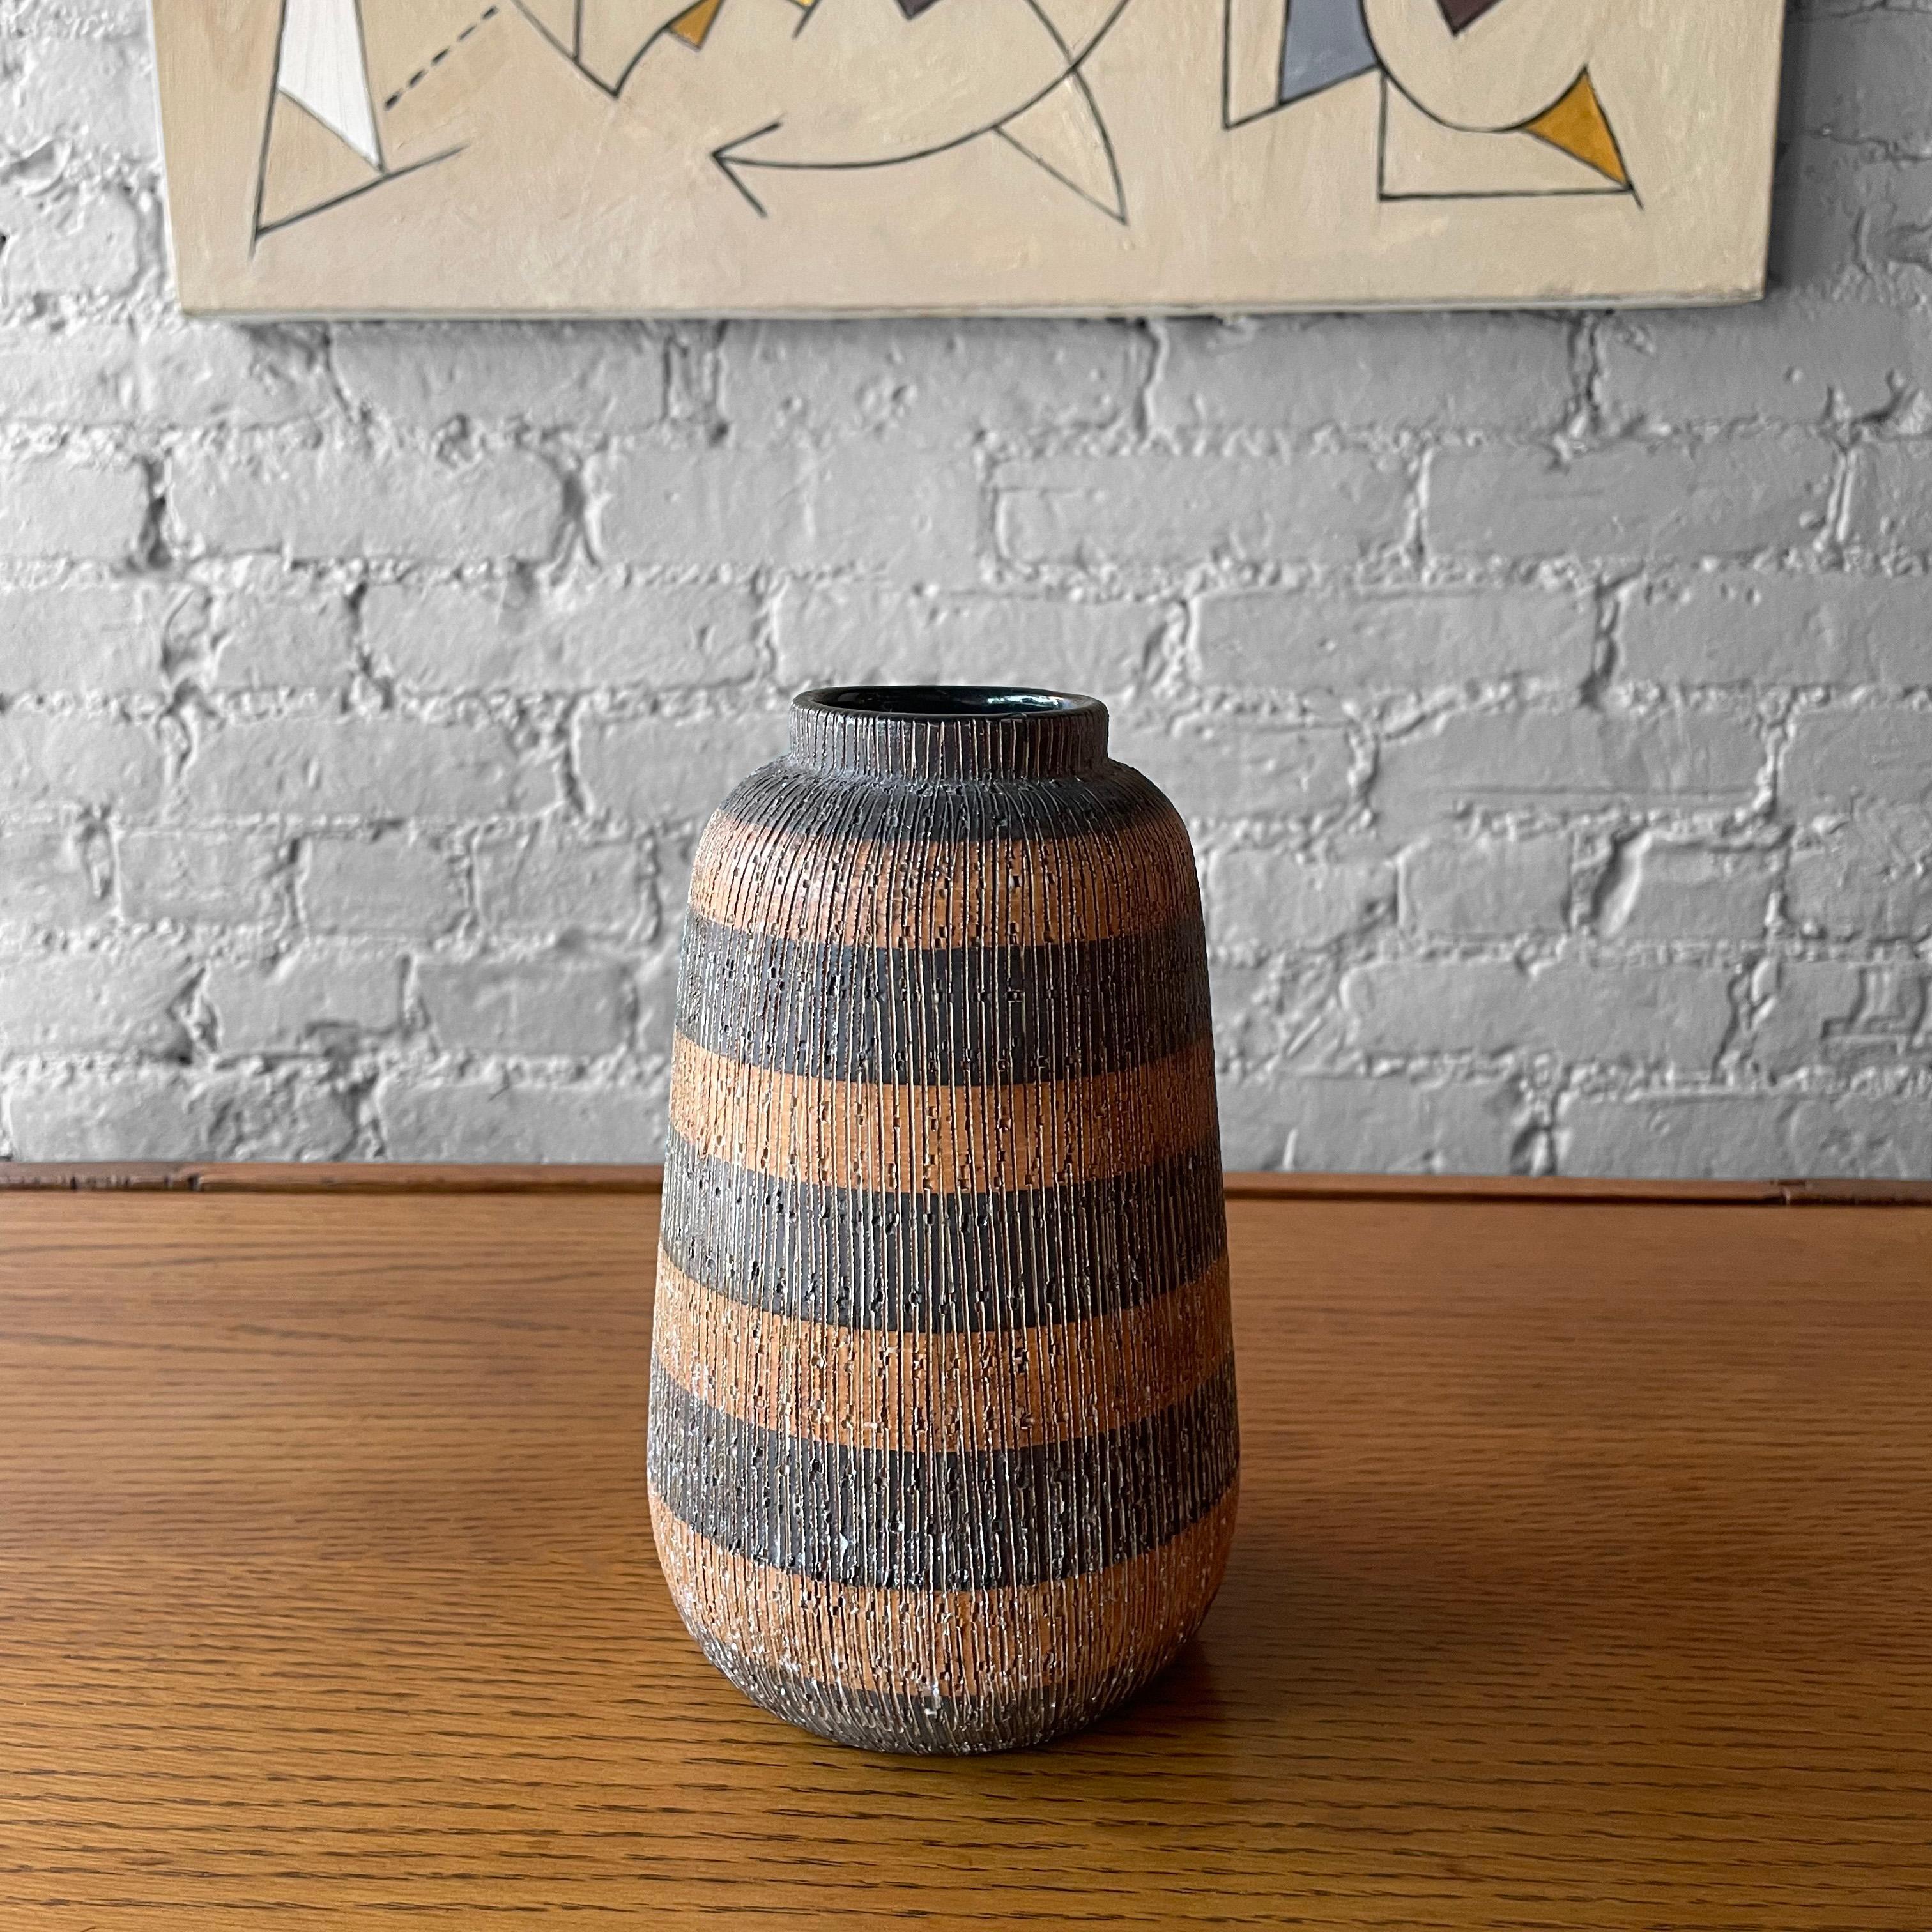 Italian, Mid-Century Modern, Seta Series, incised texture, black and brown, matt glaze, art pottery vase by Aldo Londi for Bitossi, Raymor with a 2 inch opening.